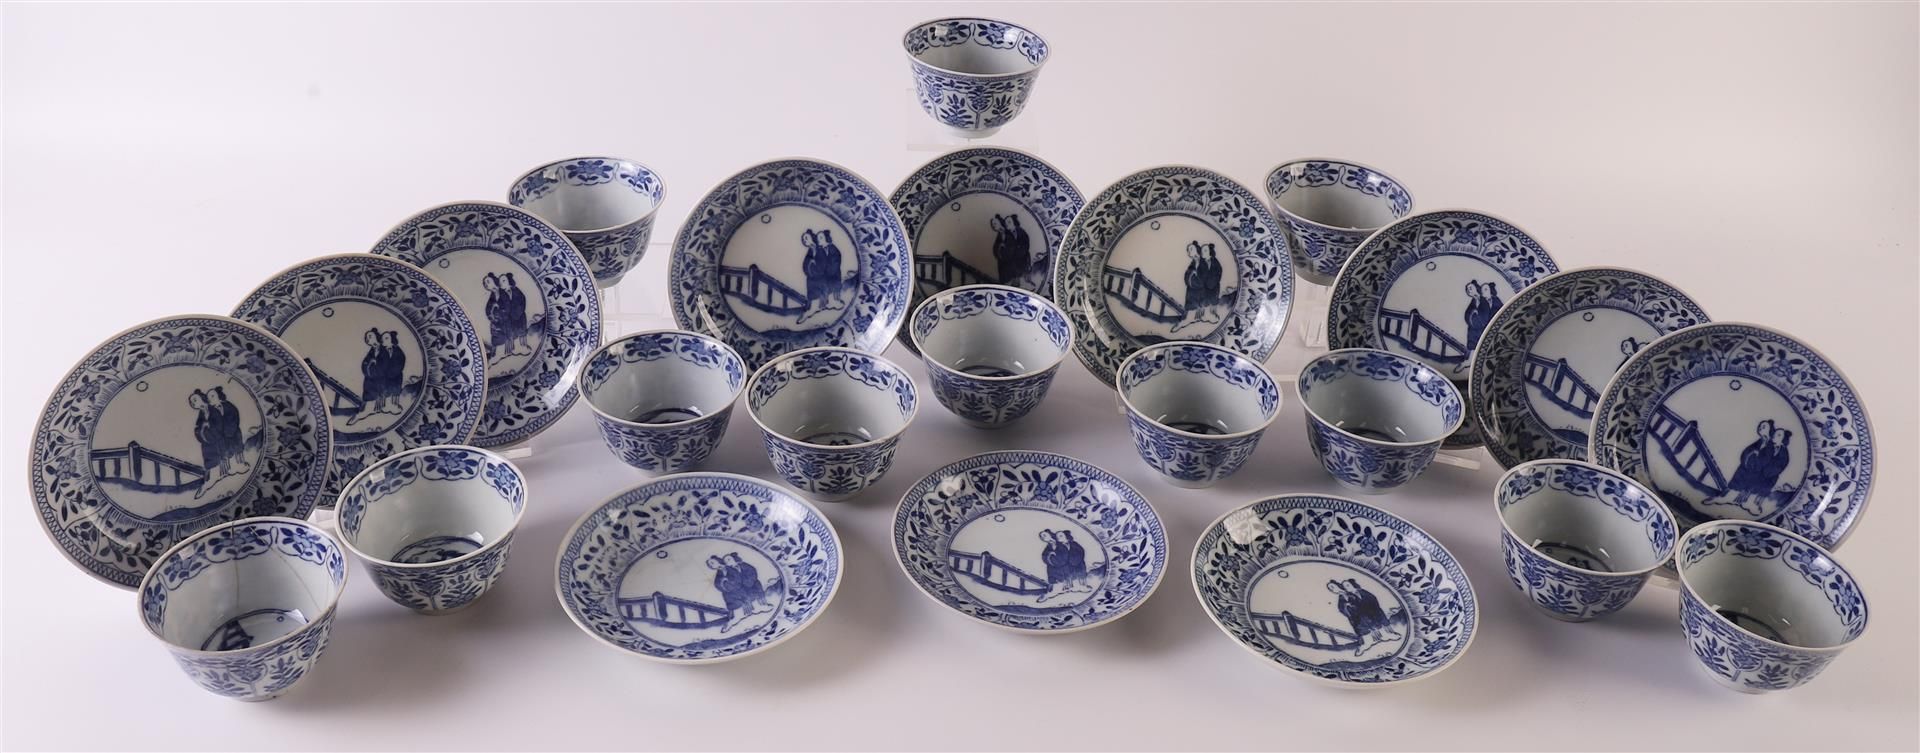 Twelve blue/white porcelain cups and saucers, China, late 19th century. Blue underglaze floral